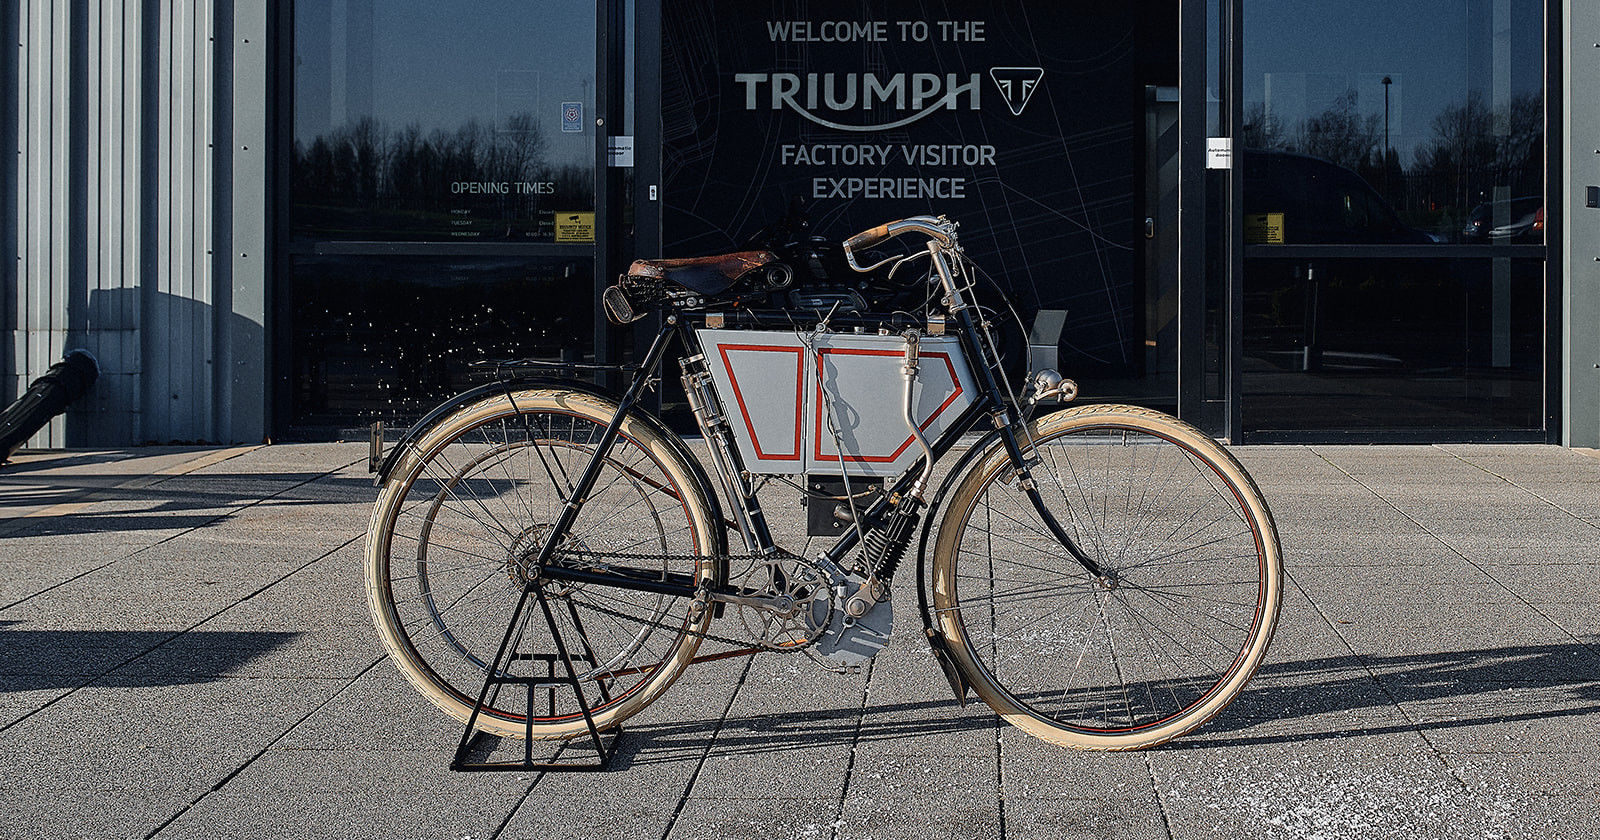 A 1901 prototype of the first Triumph motorcycle. Photo courtesy Triumph.